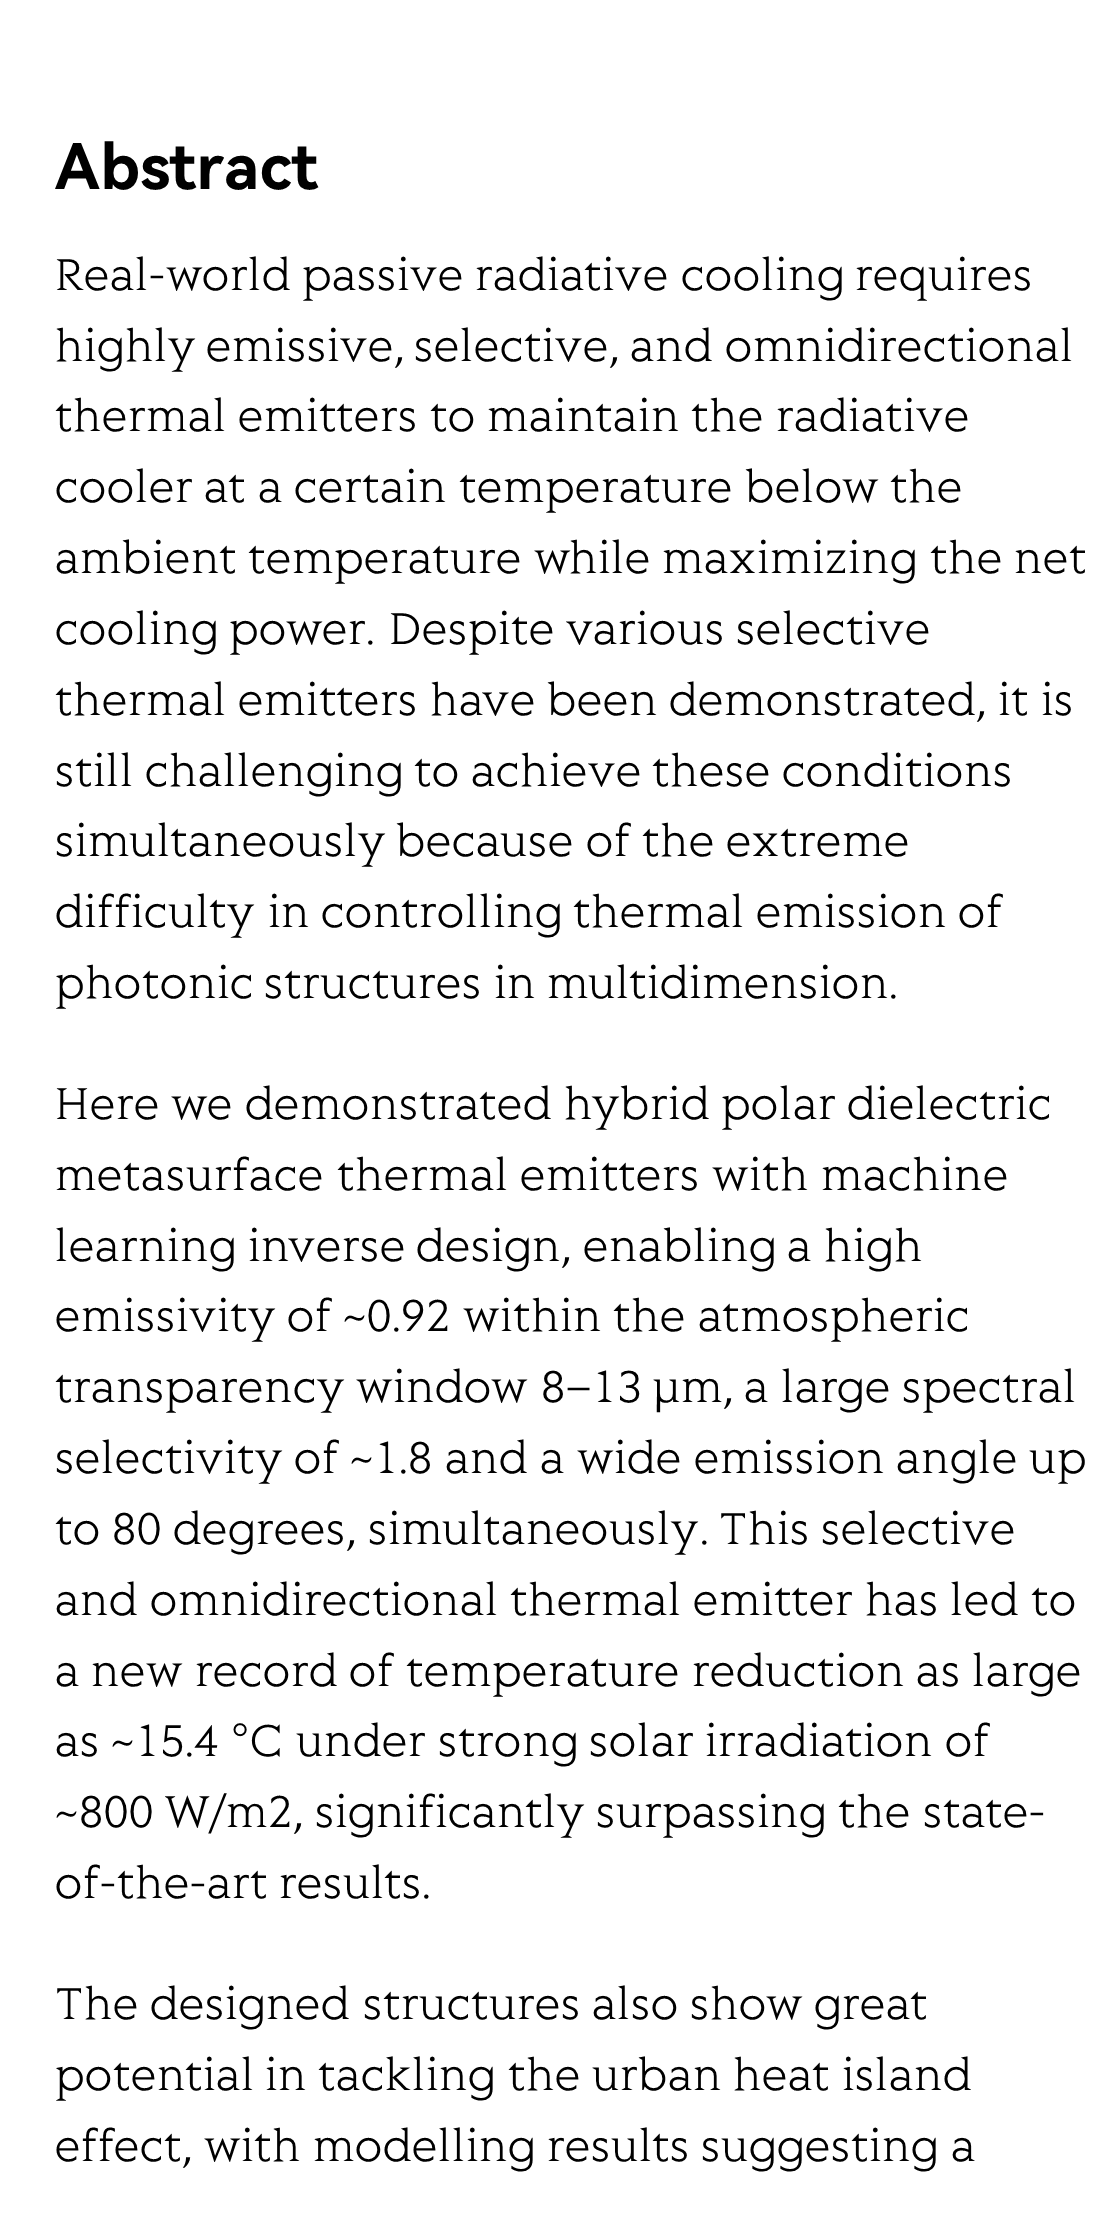 Ultrahigh performance passive radiative cooling by hybrid polar dielectric metasurface thermal emitters_2